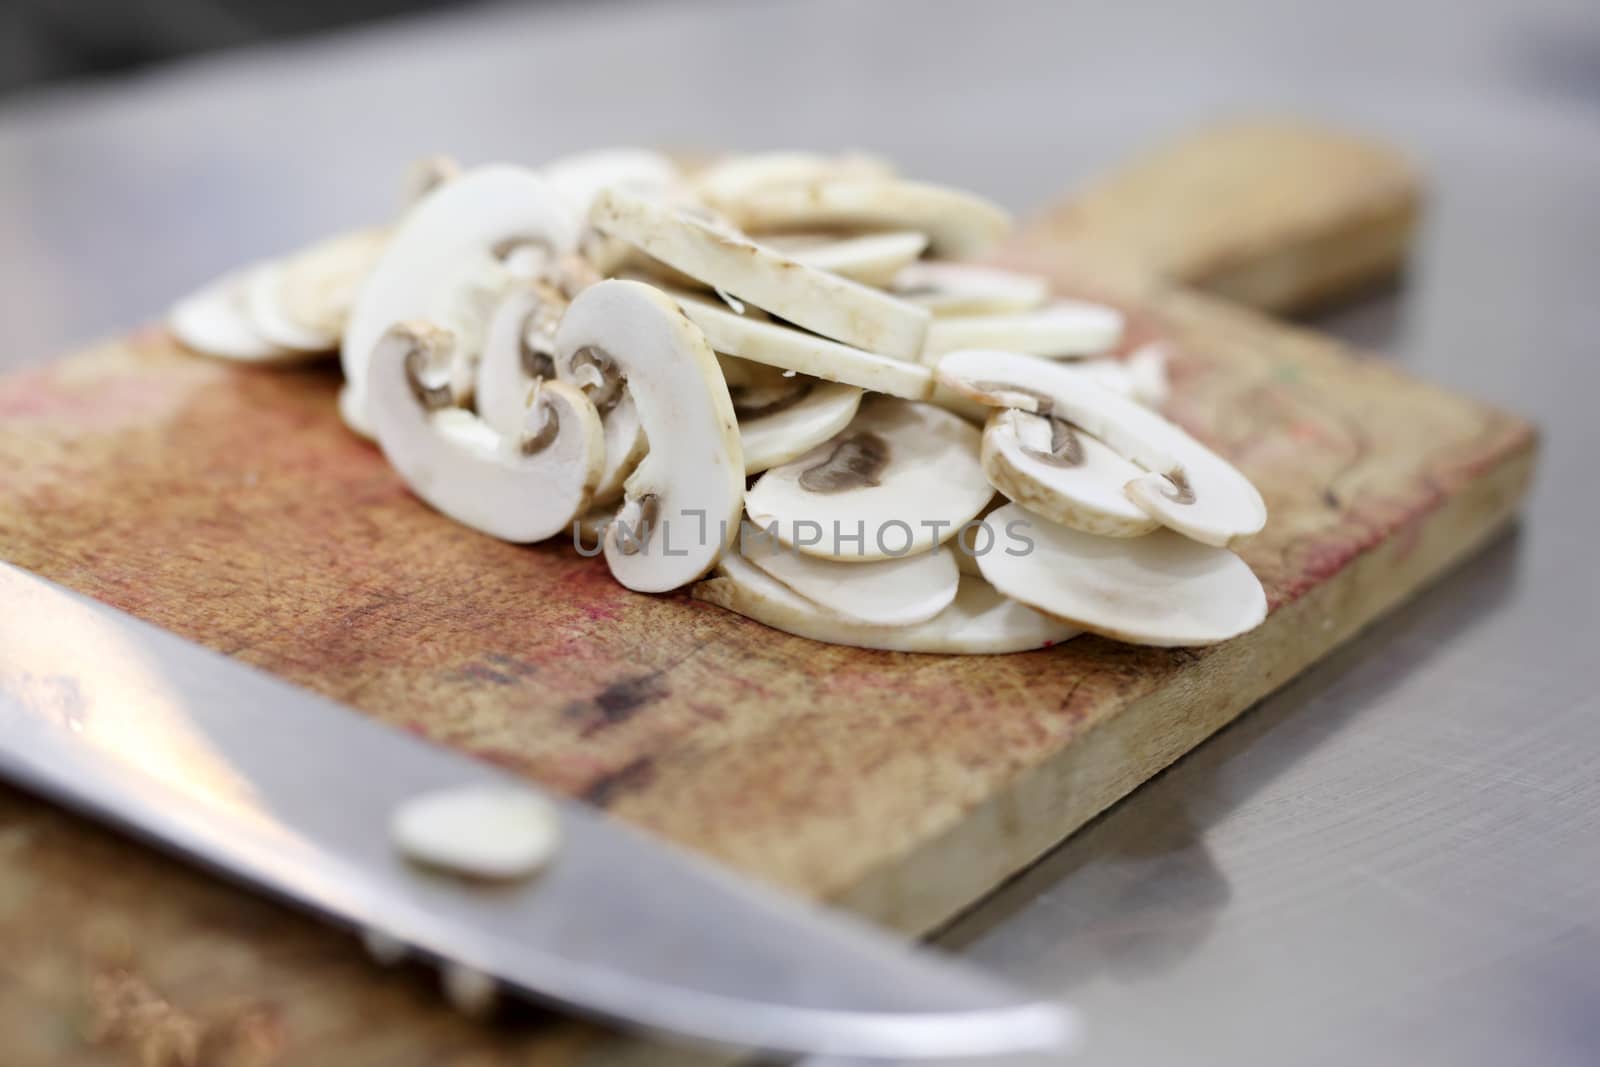 White Champignon mushroom just cutted on a kitchen table